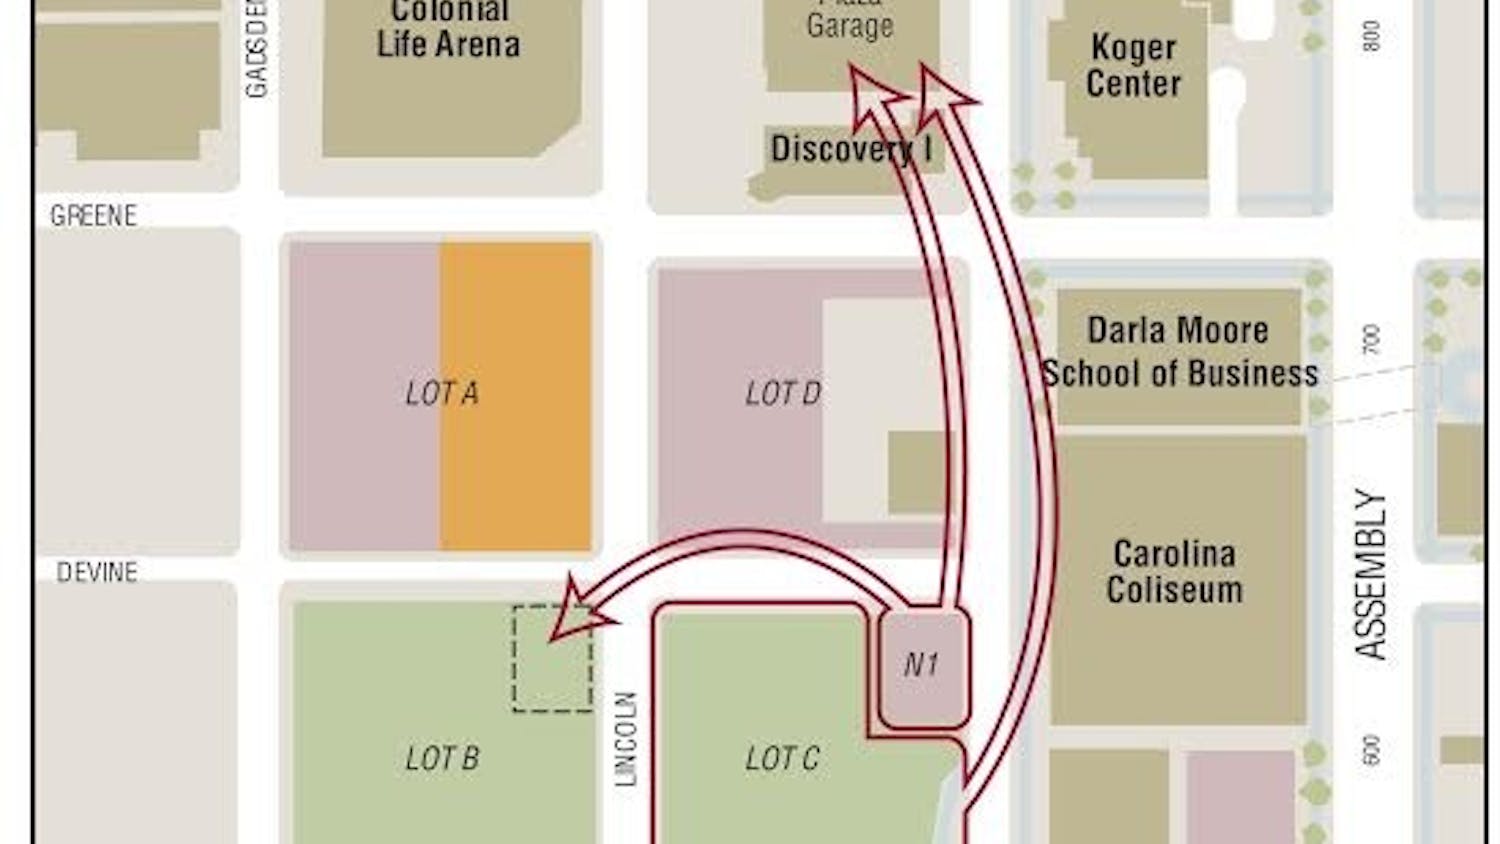 	Earlier this month, USC permanently closed a parking lot by the Carolina Coliseum (lot C), and another (lot D) will close later this year. The closures add to a decrease of 2,100 parking spots over the last three years.